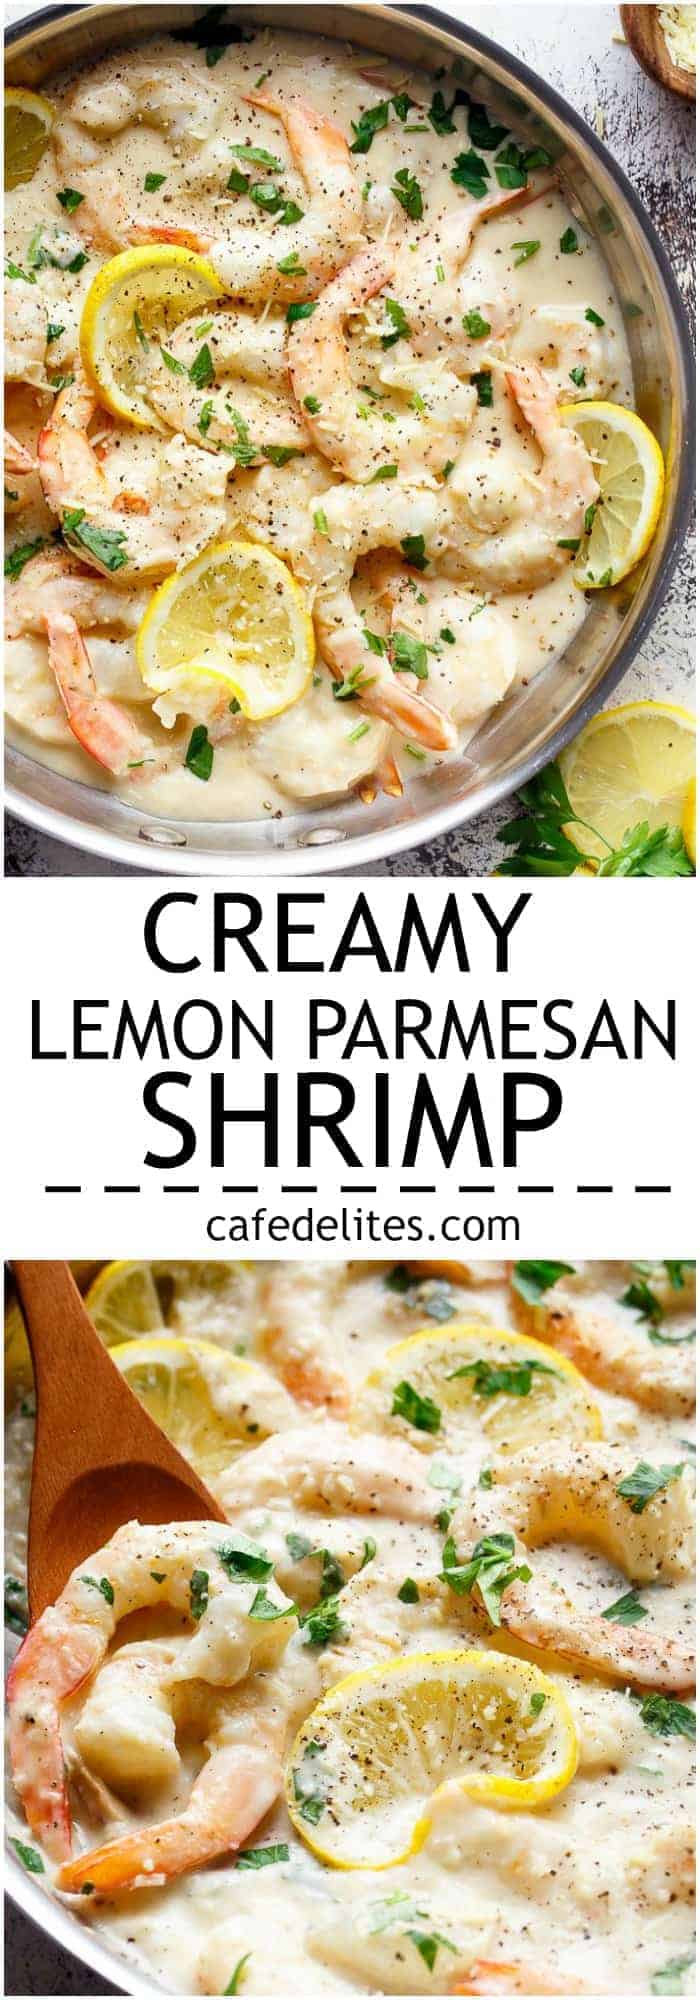 Creamy Lemon Parmesan Shrimp is a restaurant quality gourmet meal! Only minutes to make and full of lemon parmesan flavours with a good kick of garlic and NO HEAVY CREAMS as an option! Plus no dairy options! | https://cafedelites.com